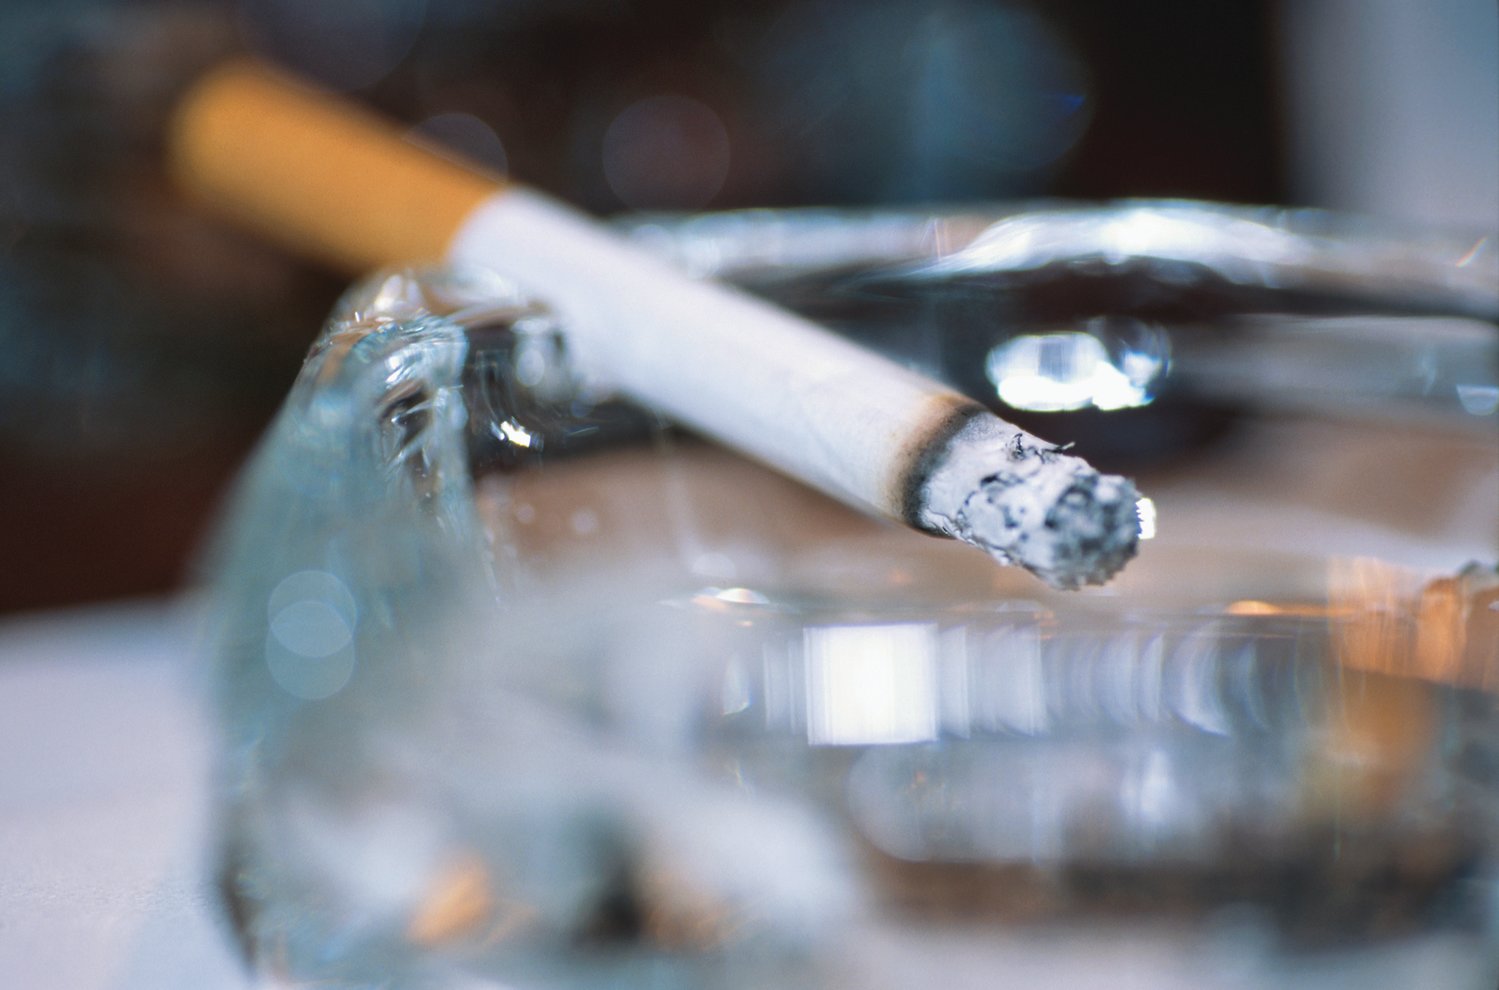 Smoking rates remain high among certain demographic groups; more work is needed to save New Yorkers’ lives and improve their health NYS TCP’s policy-driven, cost-effective and evidence-based approaches contributed to a substantial decline in tobacco use.